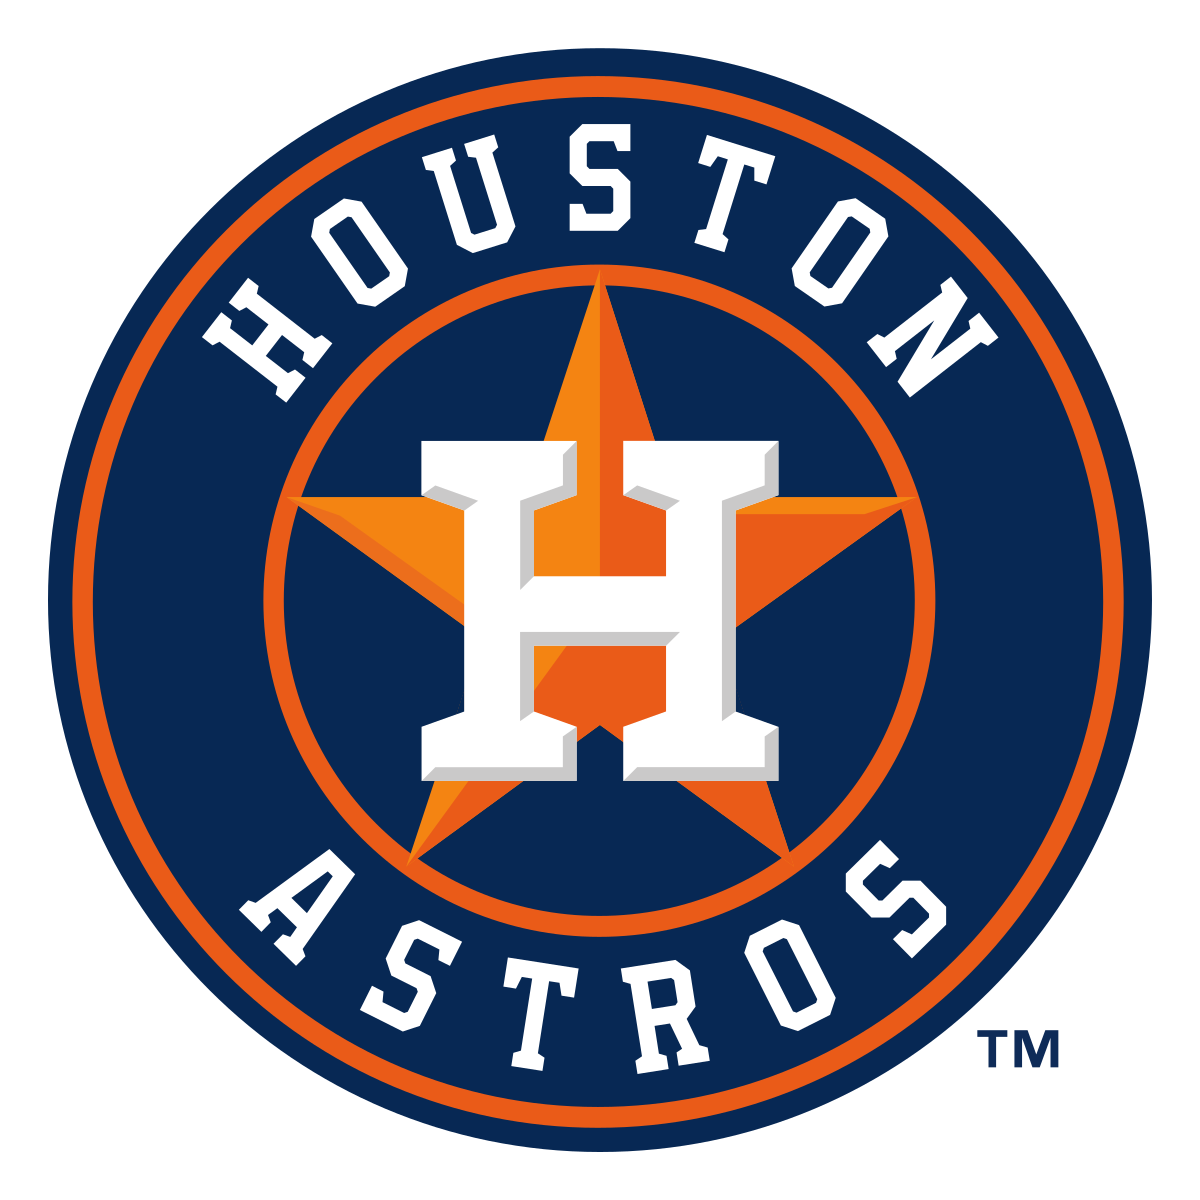 Presale Codes for Opening Day 2018 - Houston Astros